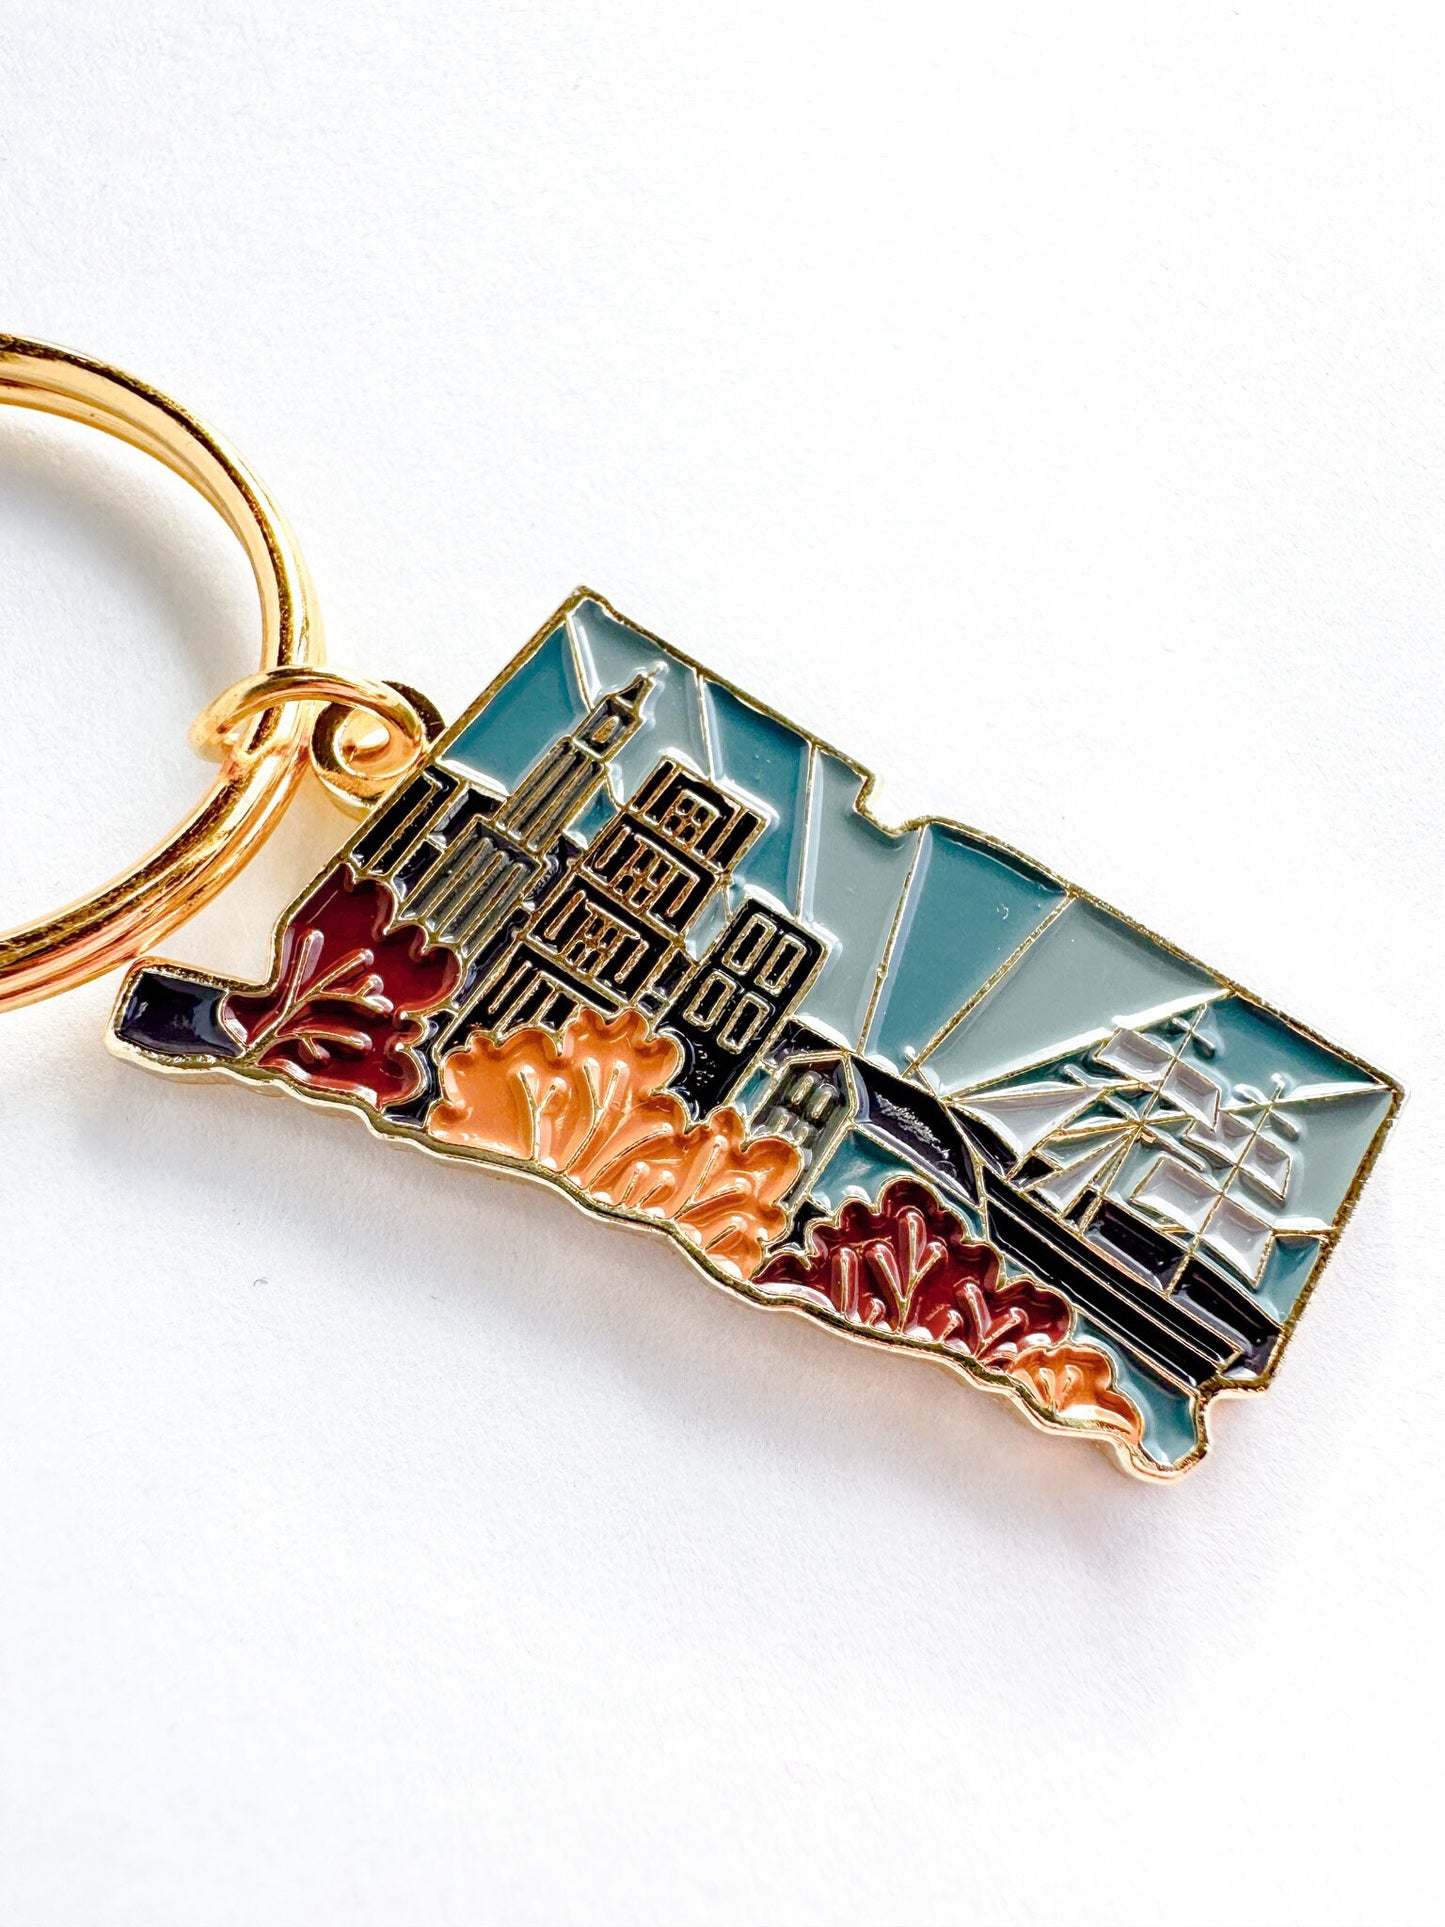 Connecticut Soft Enamel Keychain | Connecticut Outline Key Ring | Illustrated State Keychain 1.5"